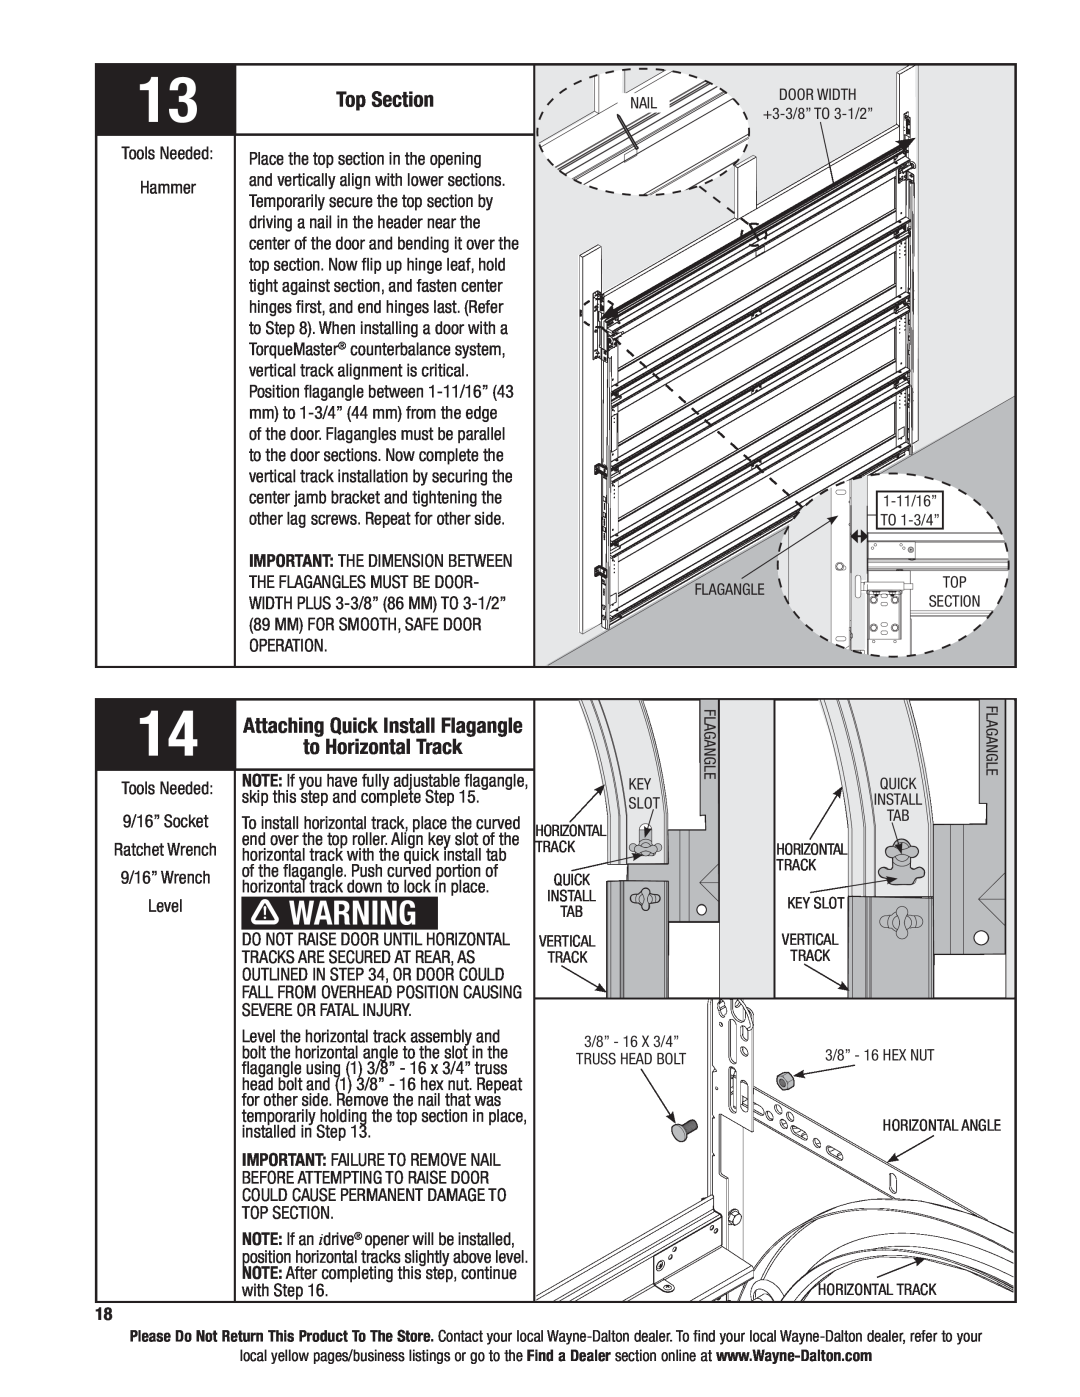 Wayne-Dalton 9600 installation instructions Top Section, to Horizontal Track, Attaching Quick Install Flagangle 